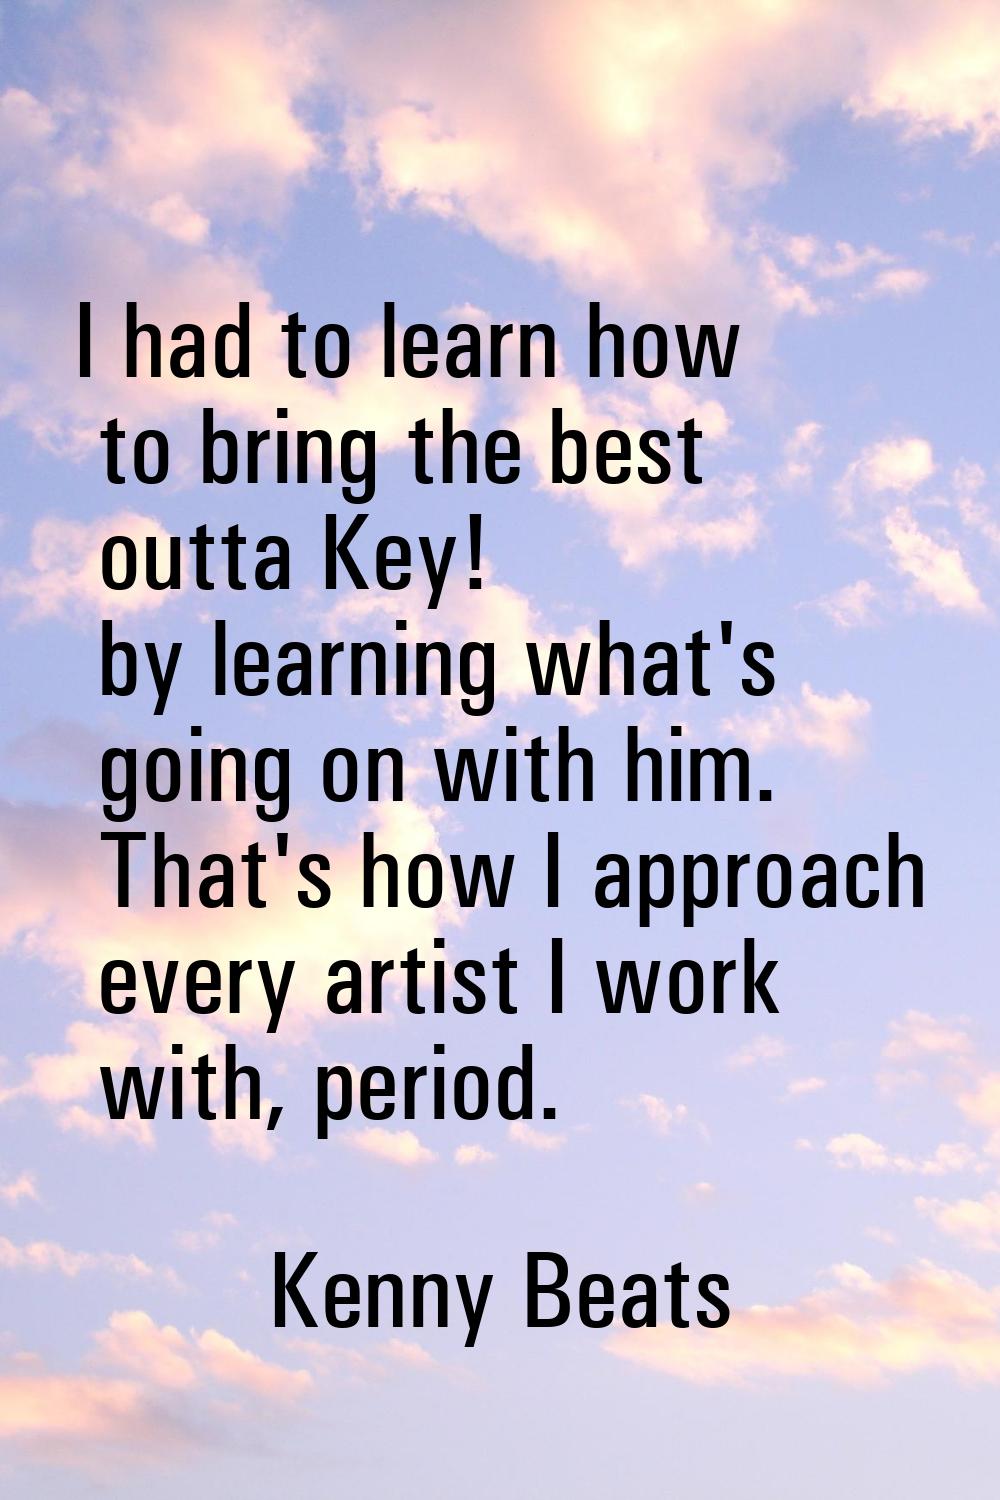 I had to learn how to bring the best outta Key! by learning what's going on with him. That's how I 